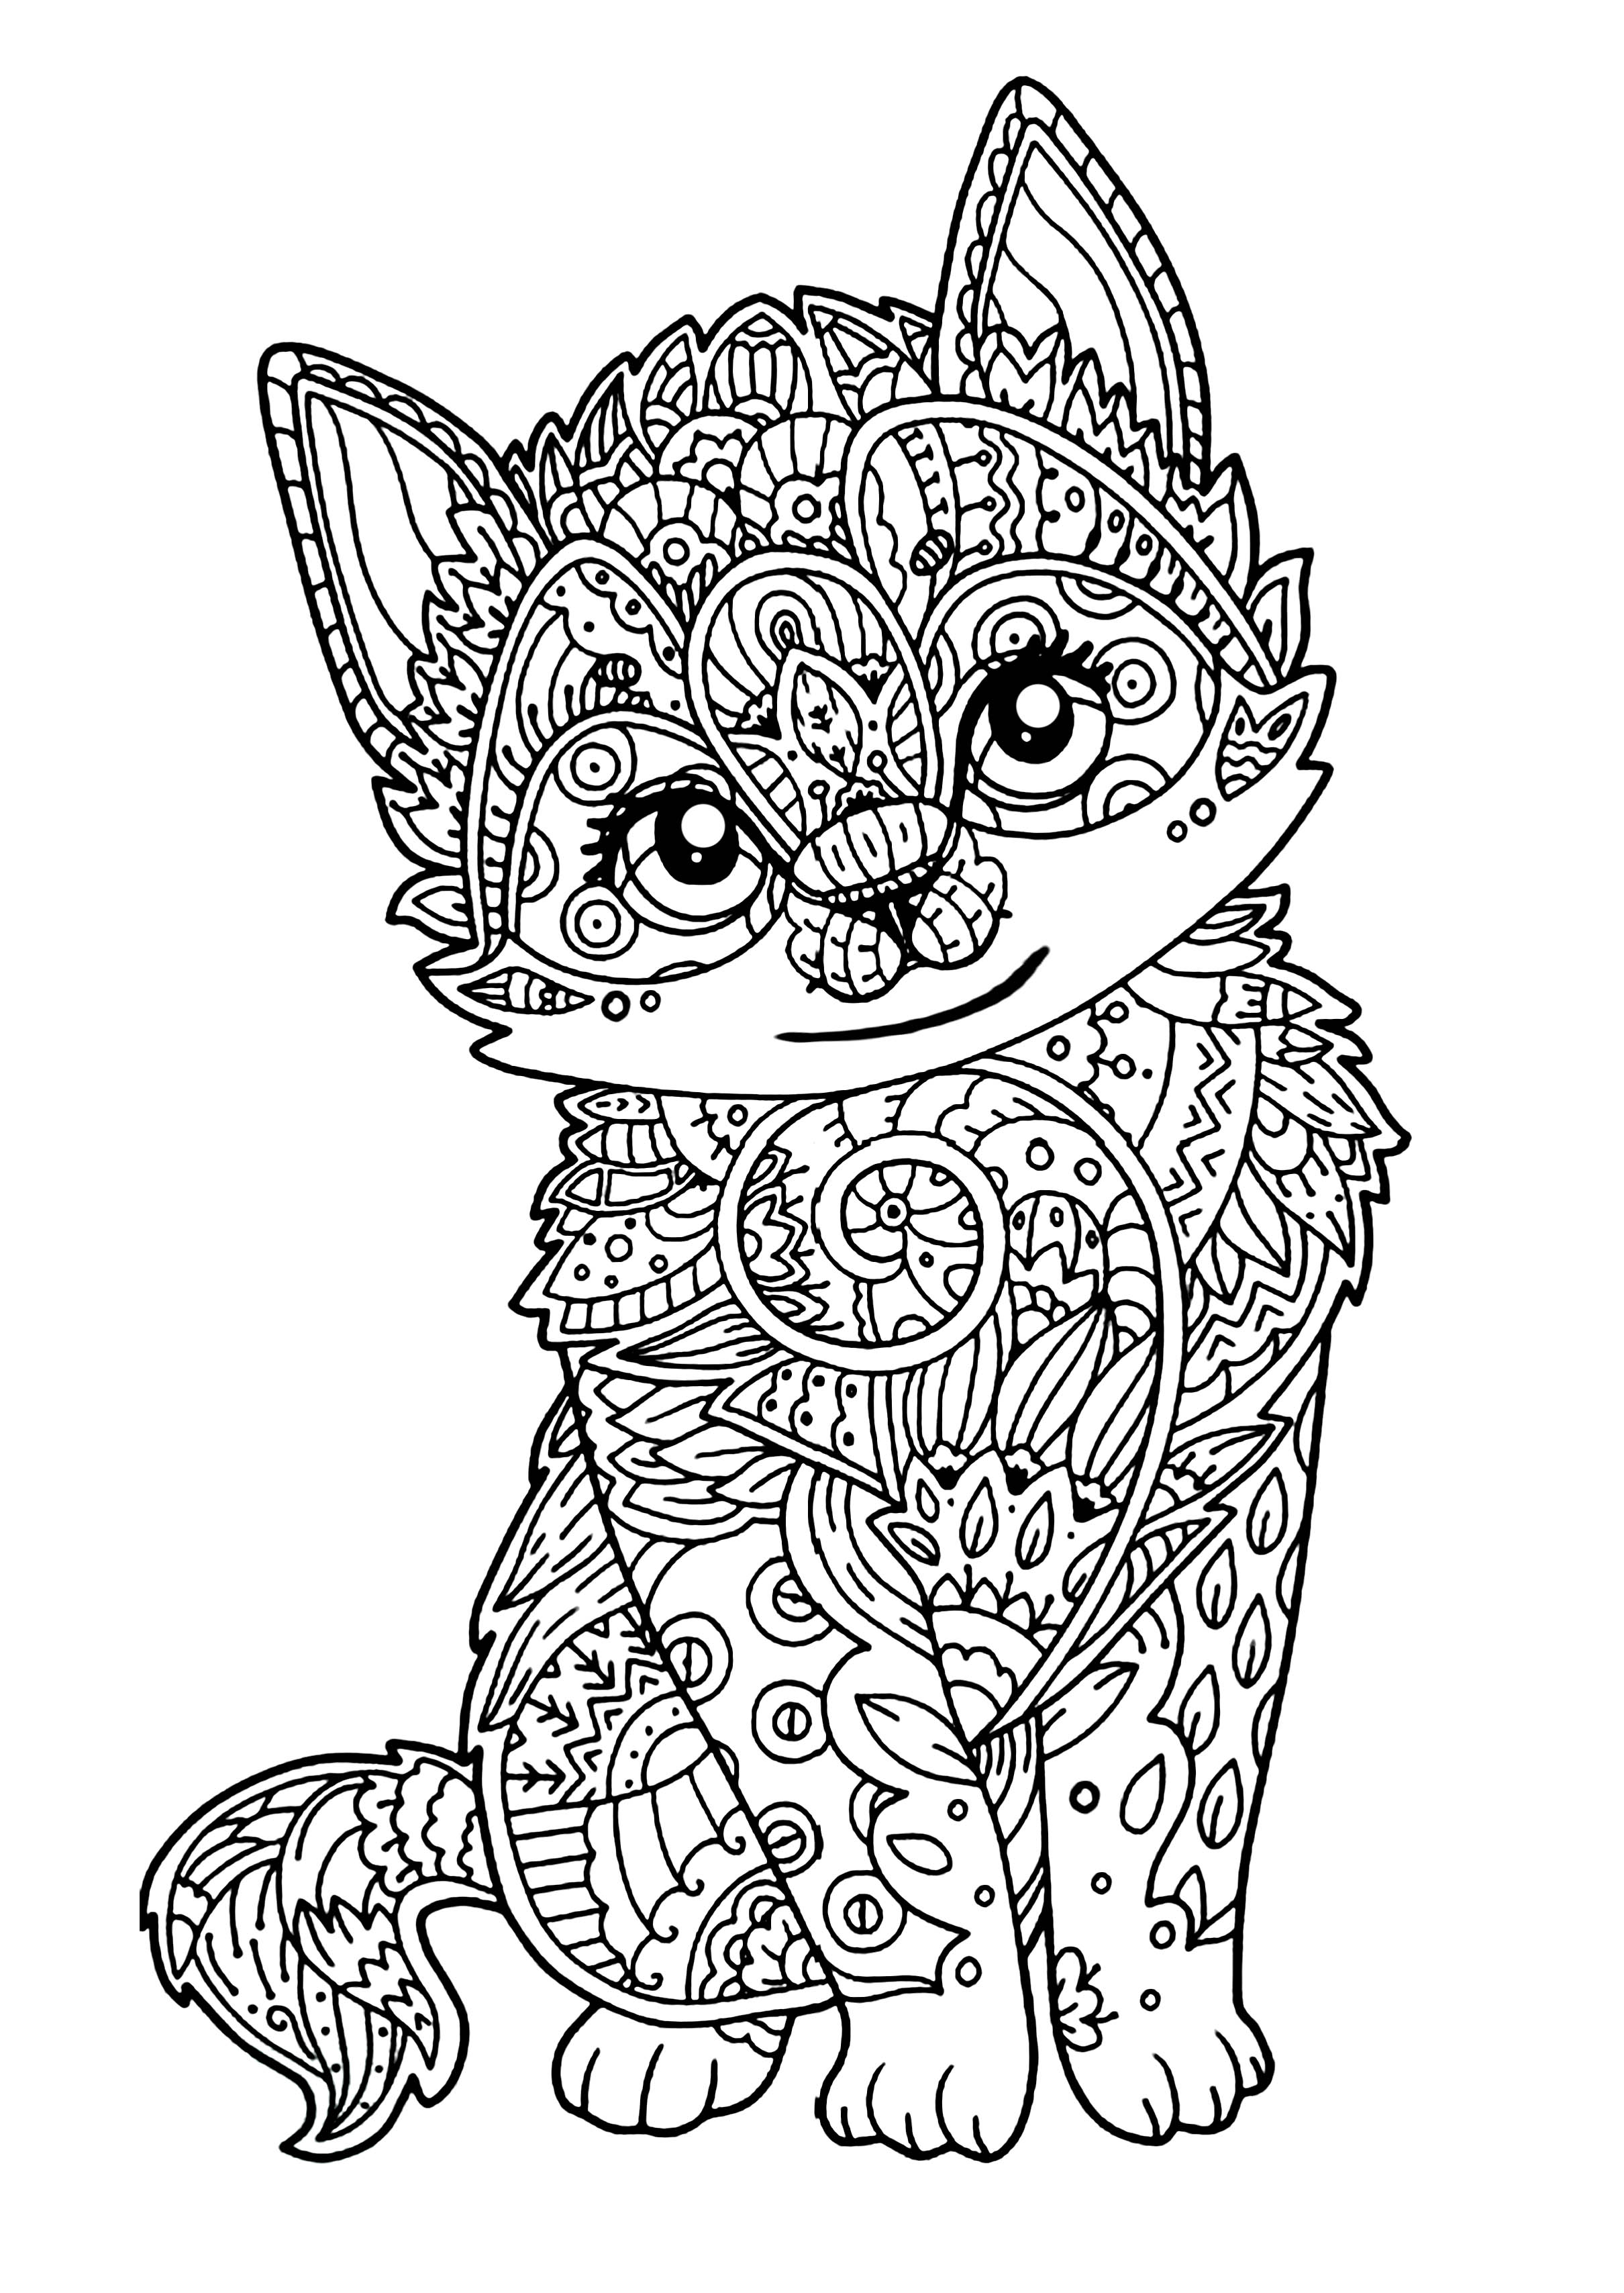 owl-coloring-pages-for-adults-free-detailed-owl-coloring-pages